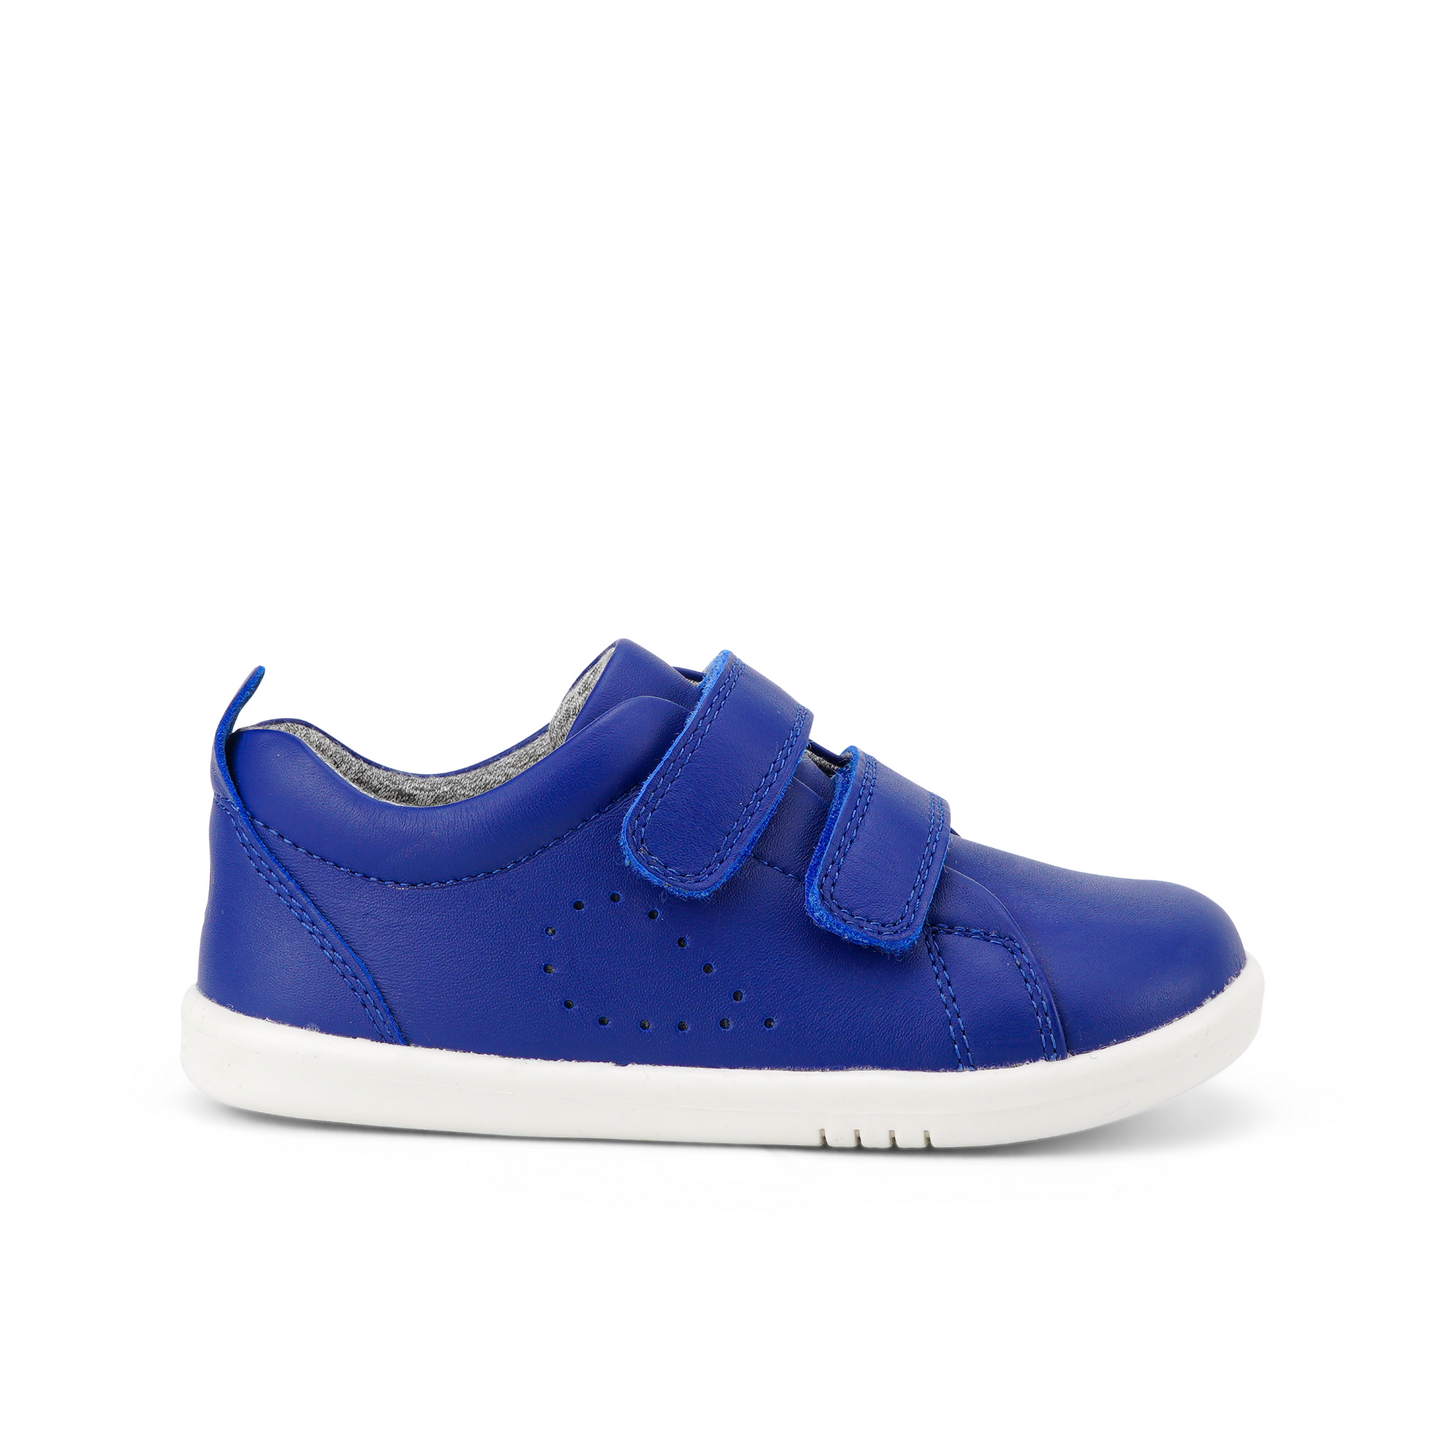 IW Grass Court Shoe in Blueberry Leather